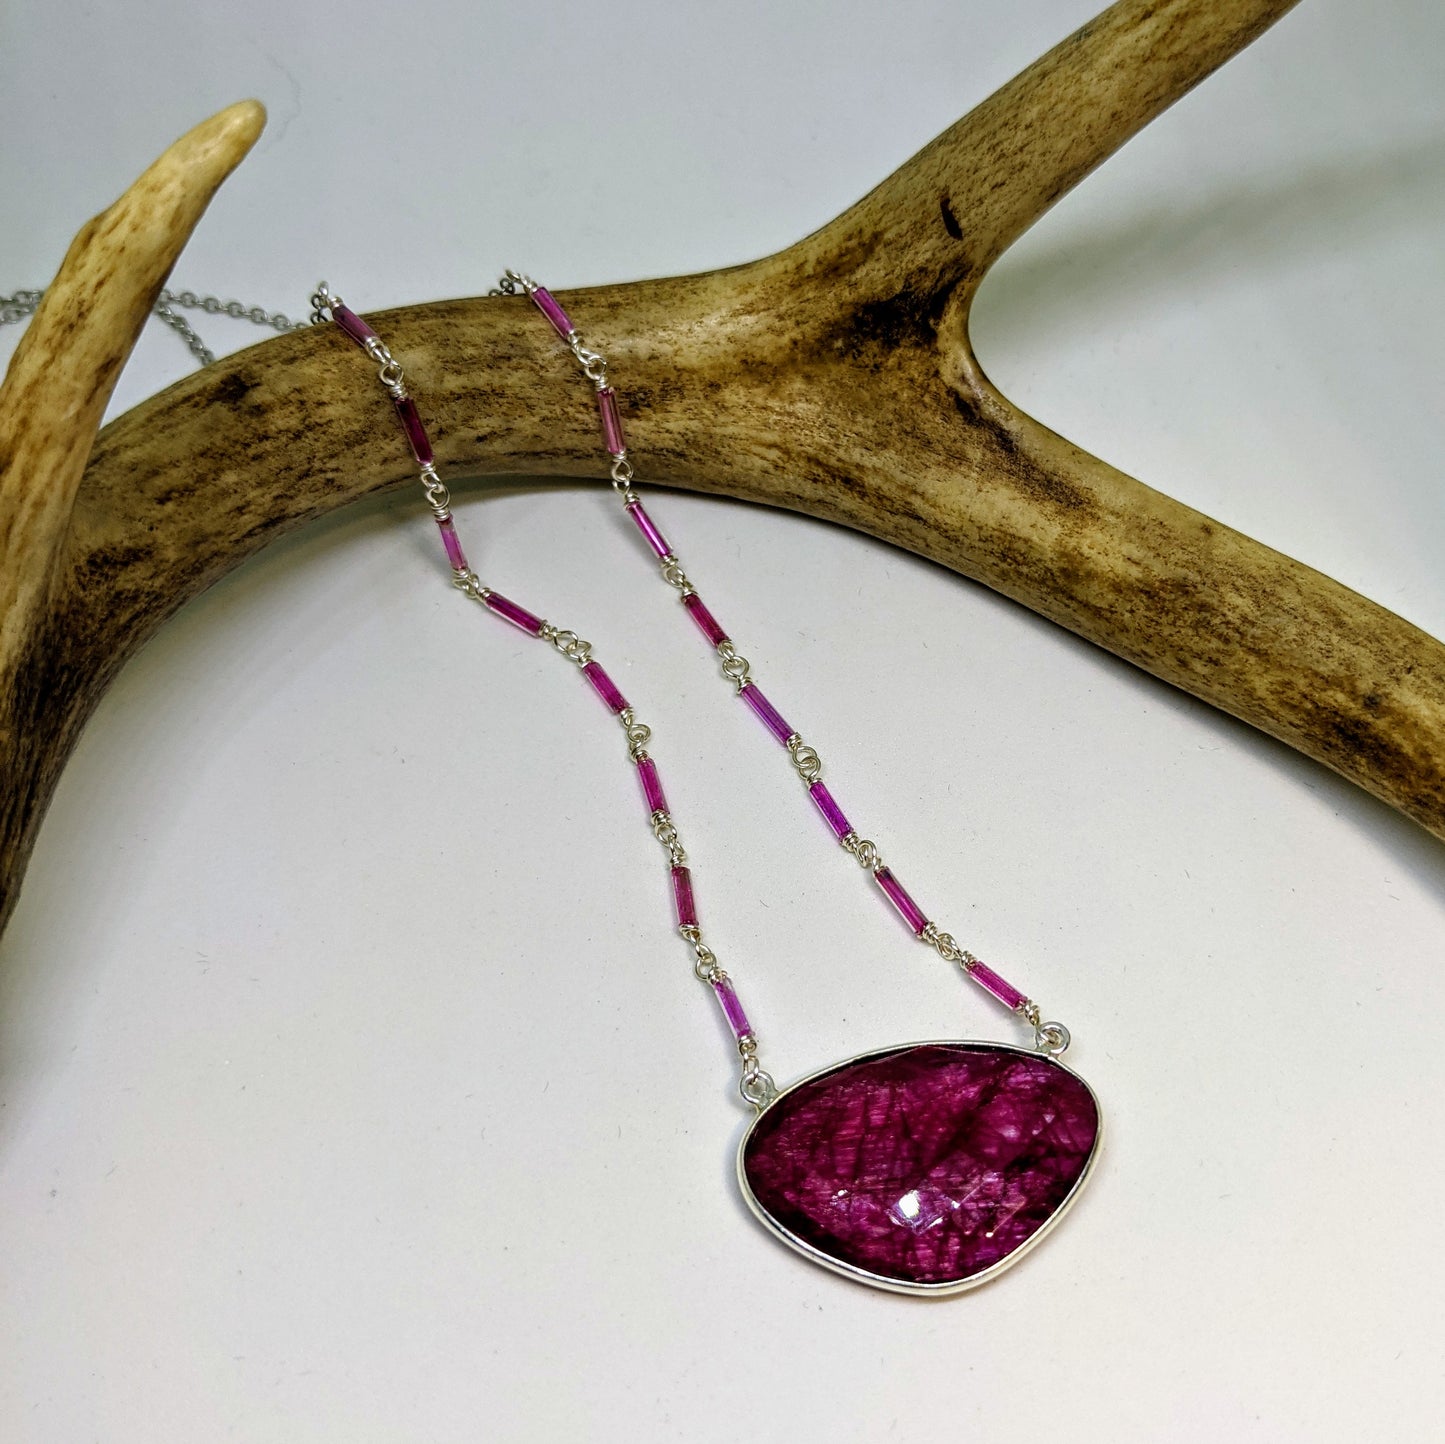 RUBY FREEFORM NECKLACE WITH HANDMADE CHAIN WITH UPCYCLED GLASS CRYSTAL BEADS-NECKLACES-Jipsi Junk-JipsiJunk